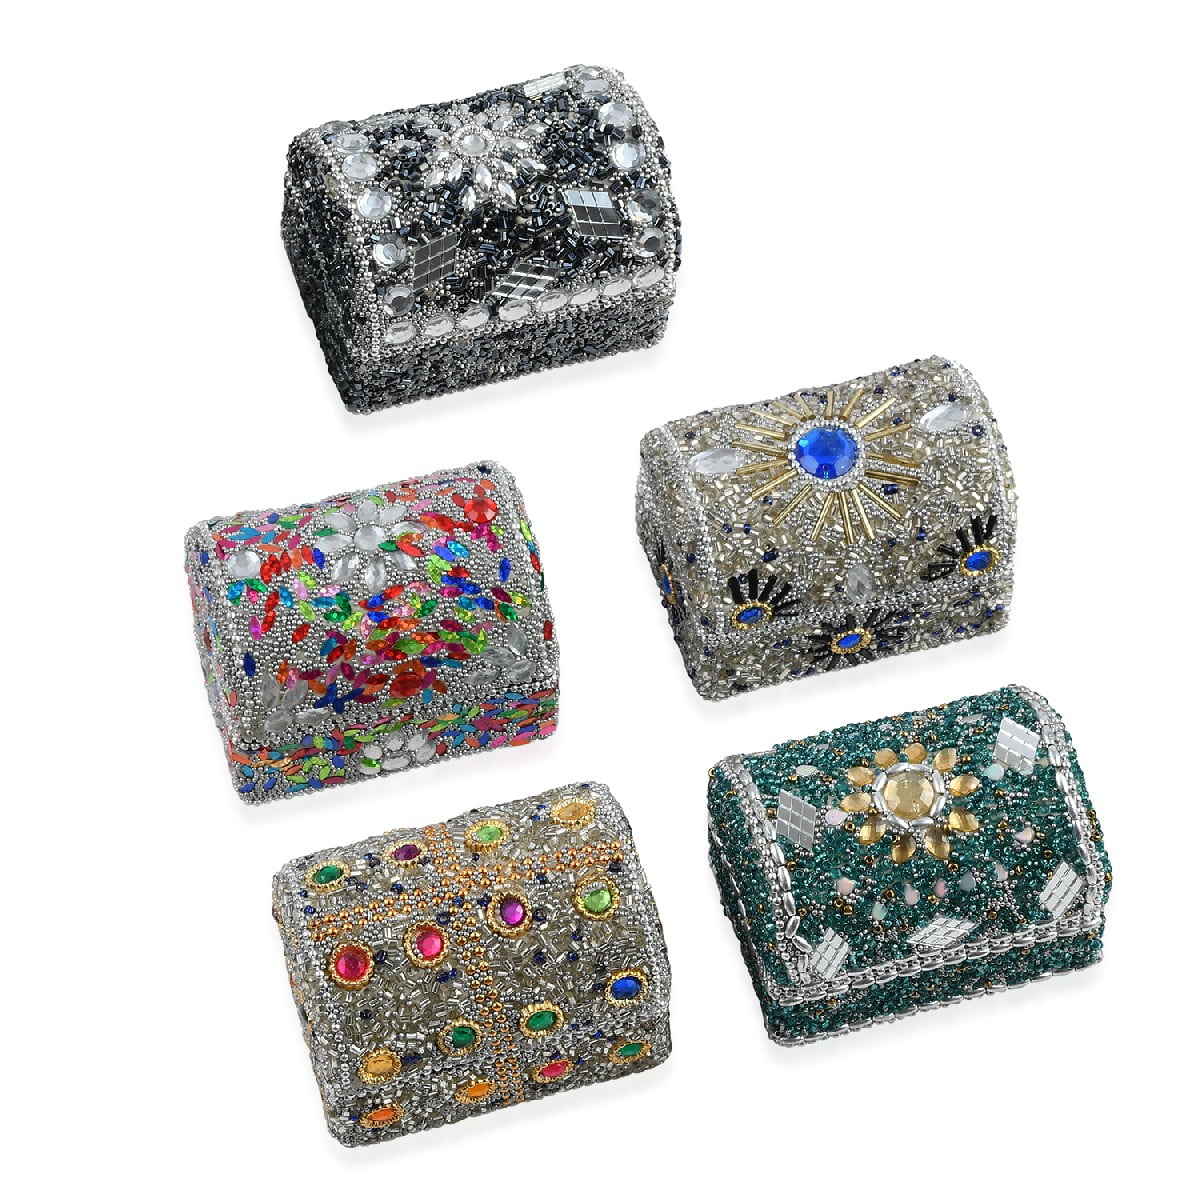 Shop LC Jewelry Holder Mini Treasure Chests Trinket Boxes Handcrafted Set of 5 Bridesmaids Jewelry Gifts Keepsake Storage Box Multicolor Multi Beaded Wooden 